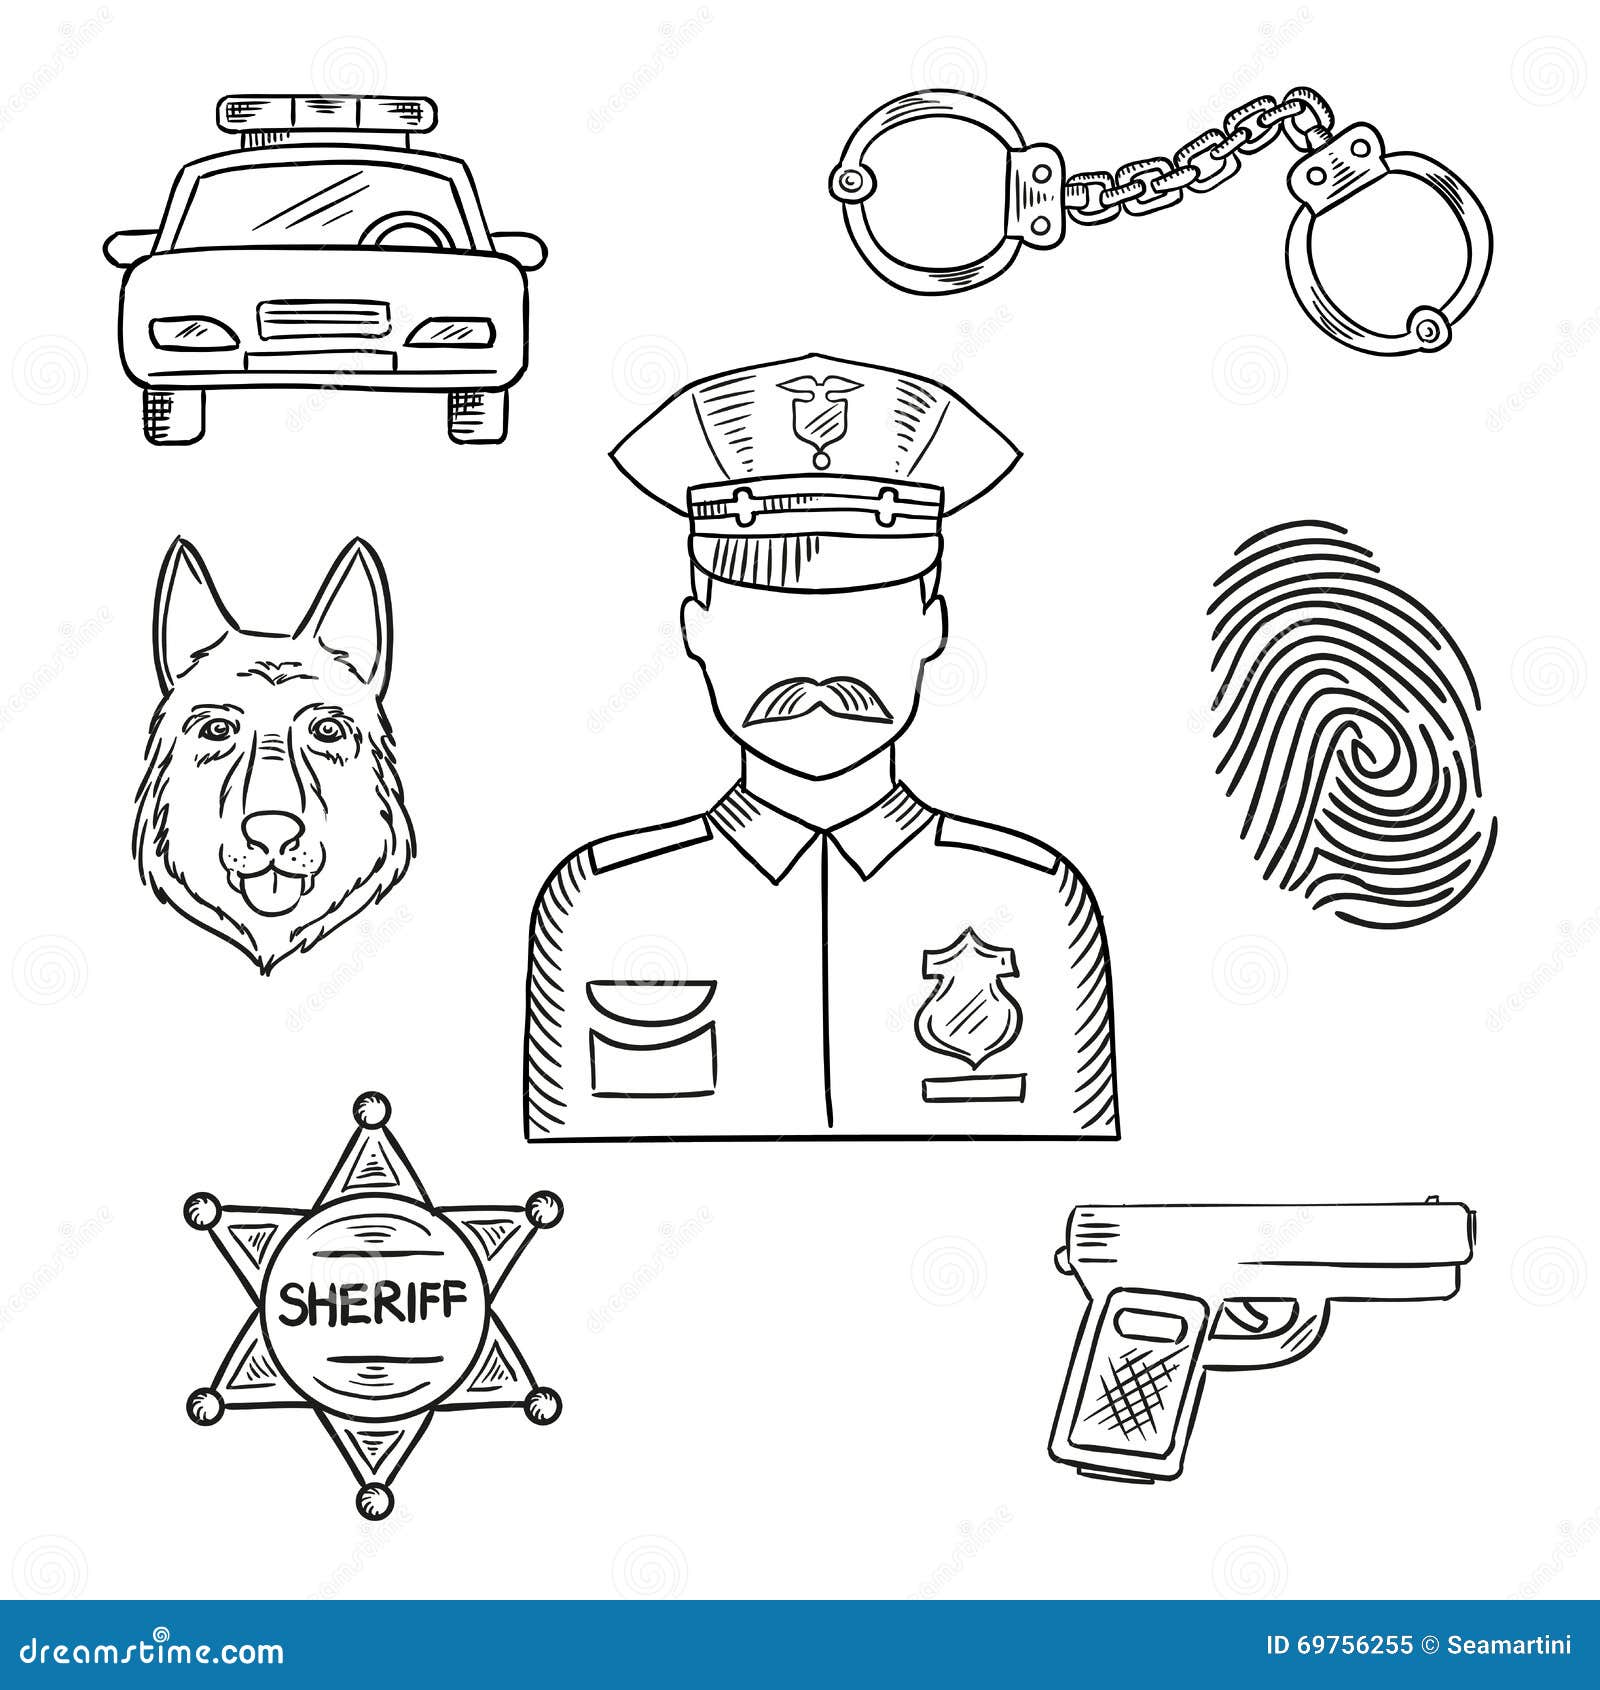 Police Officer Or Policeman Profession Sketch Icon Stock